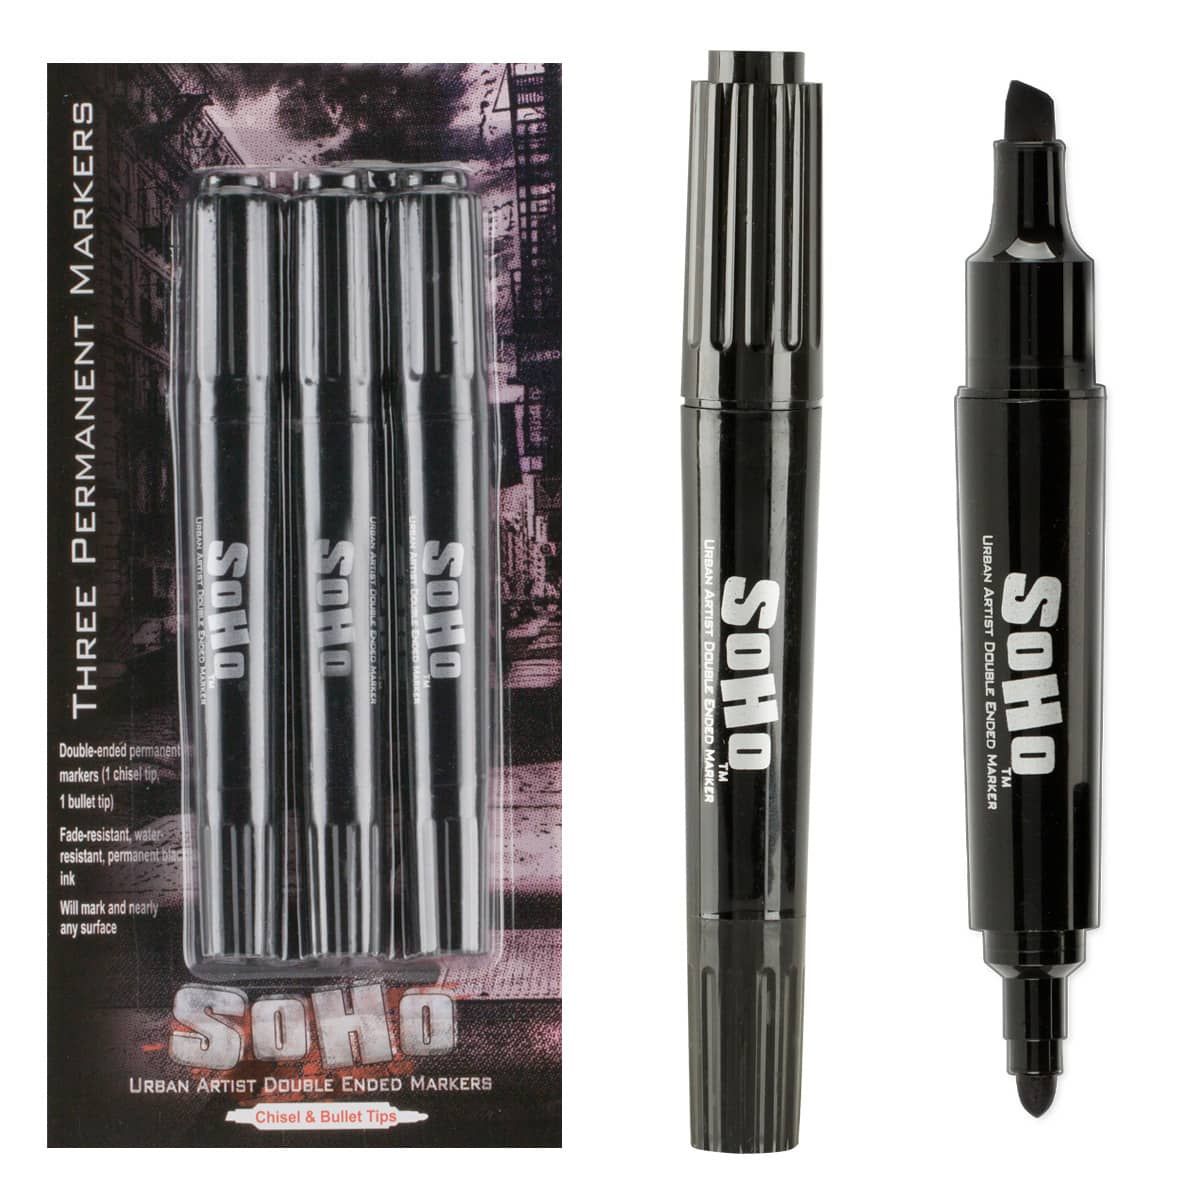 SoHo Urban Artist Double Ended Markers